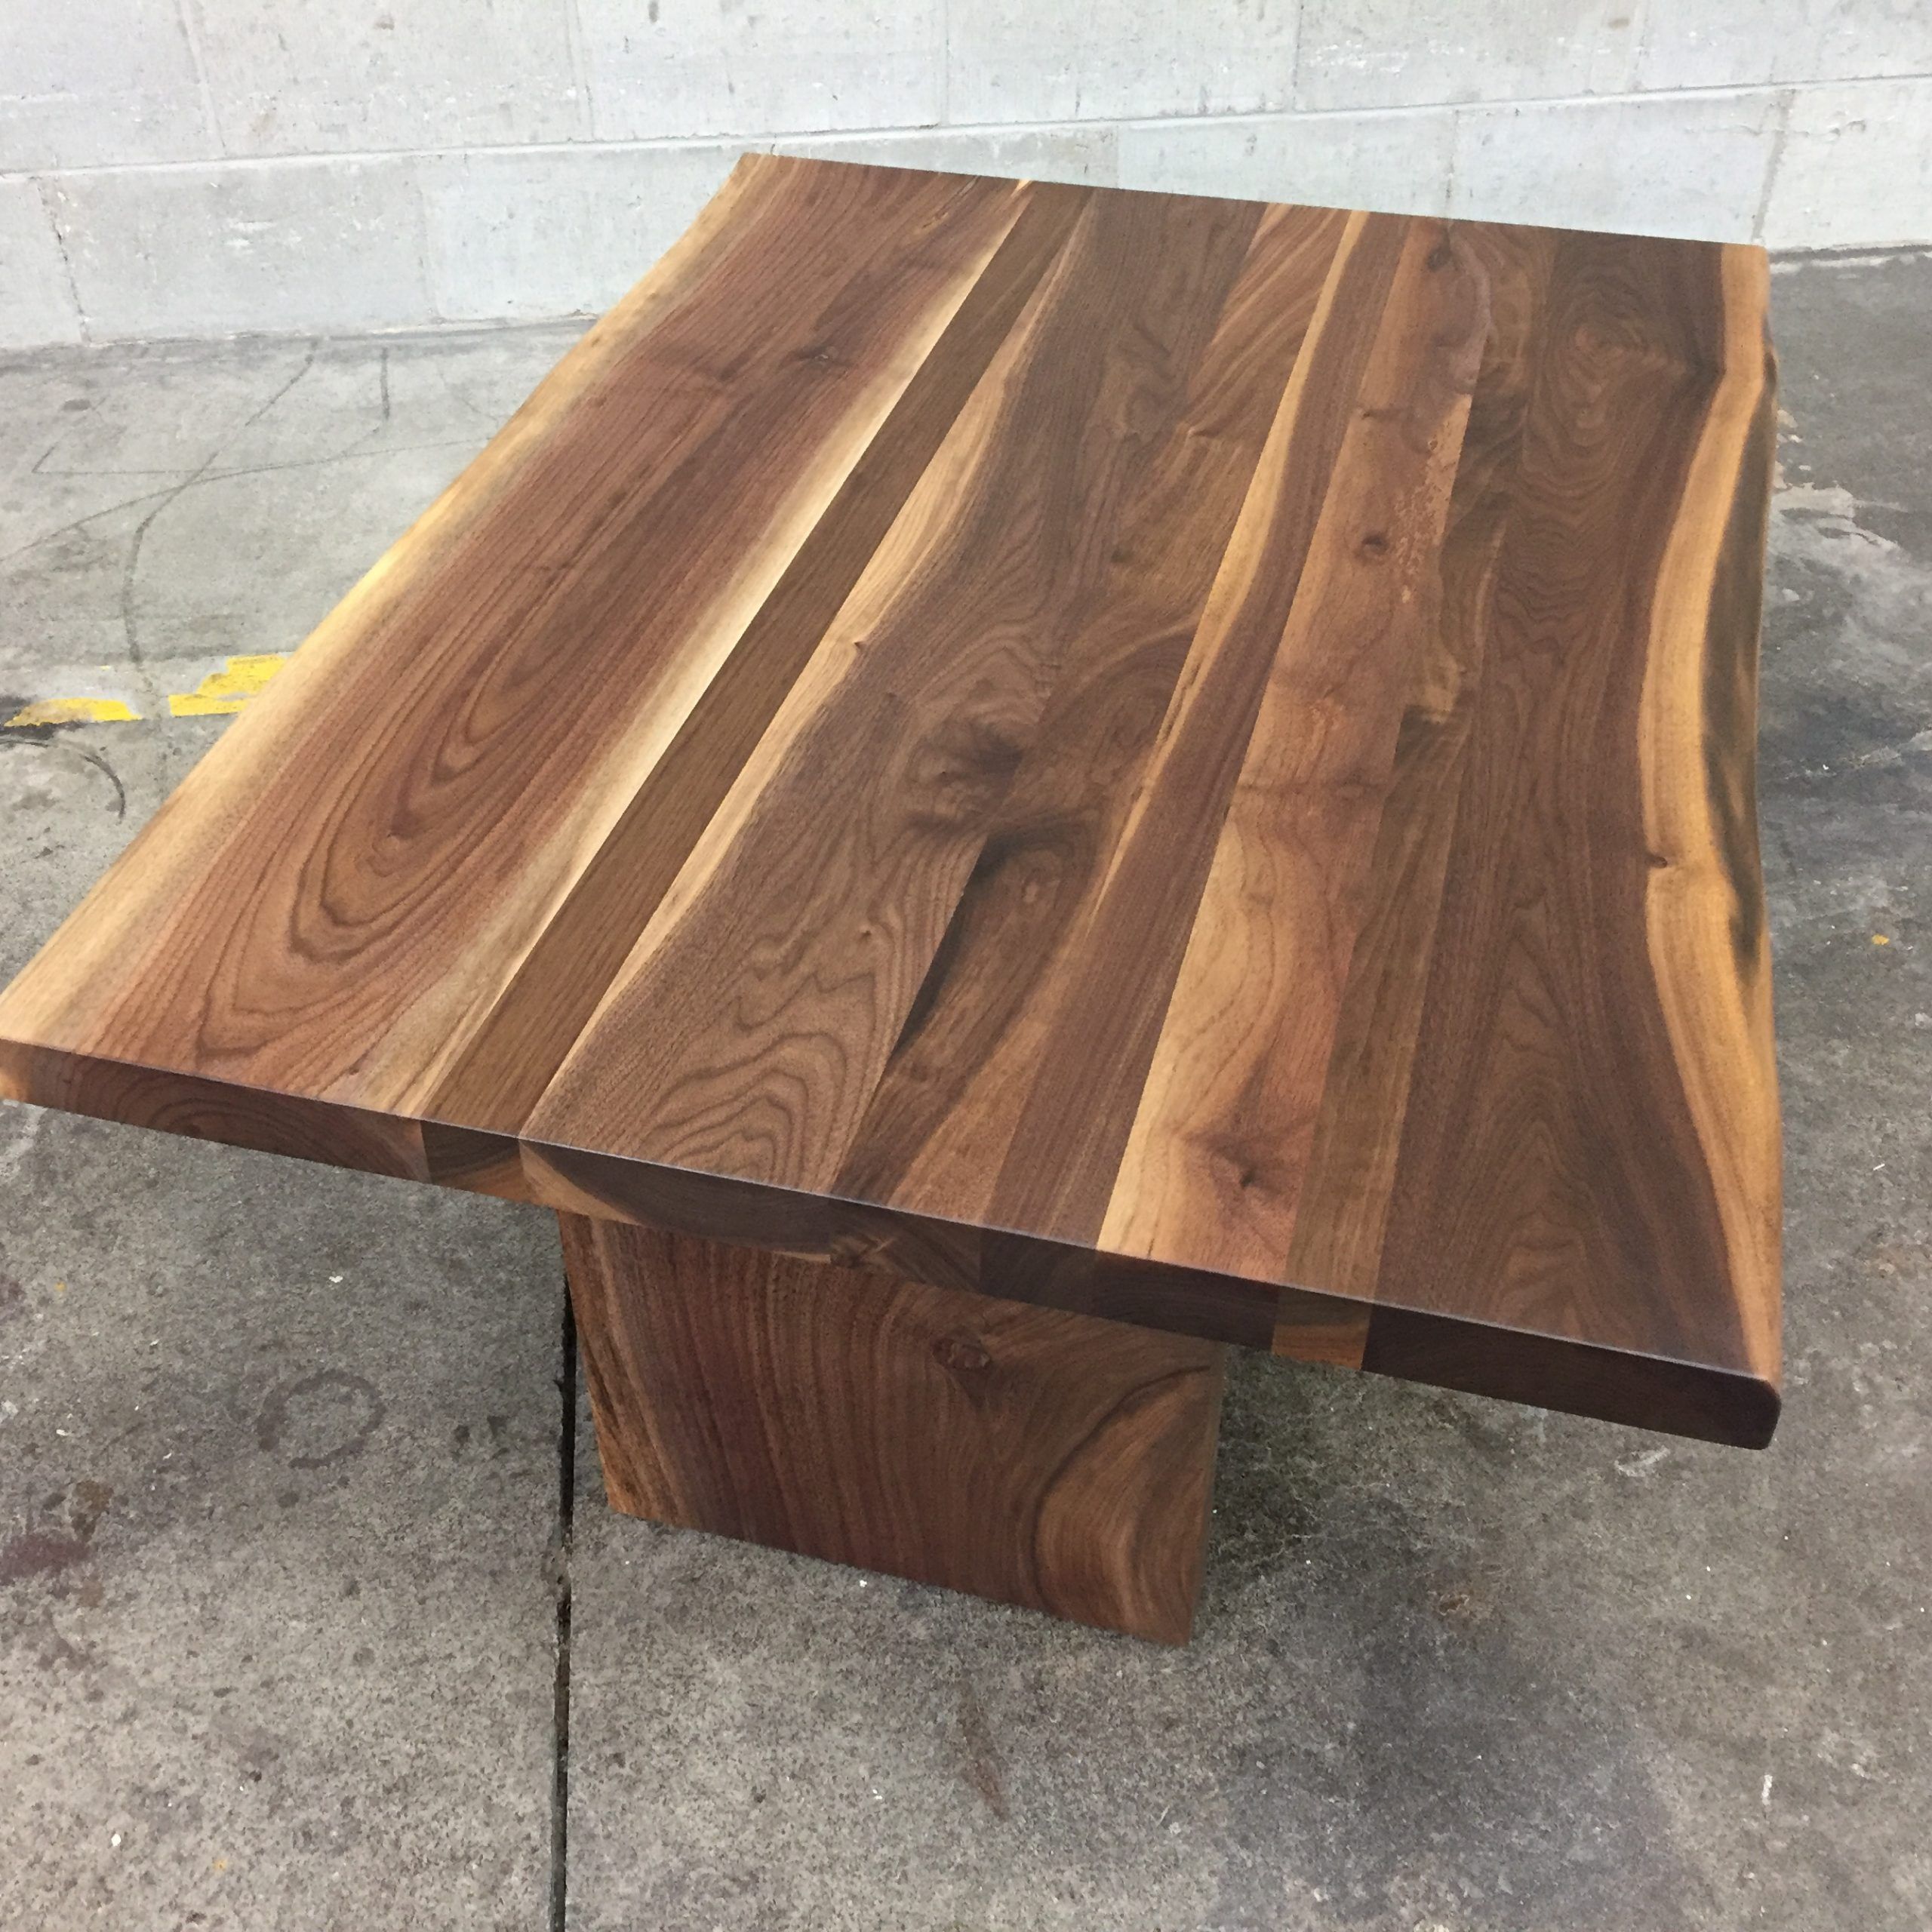 Black Coffee Tables In Best And Newest Laminated Live Edge Black Walnut Coffee Table – Solu (View 13 of 20)